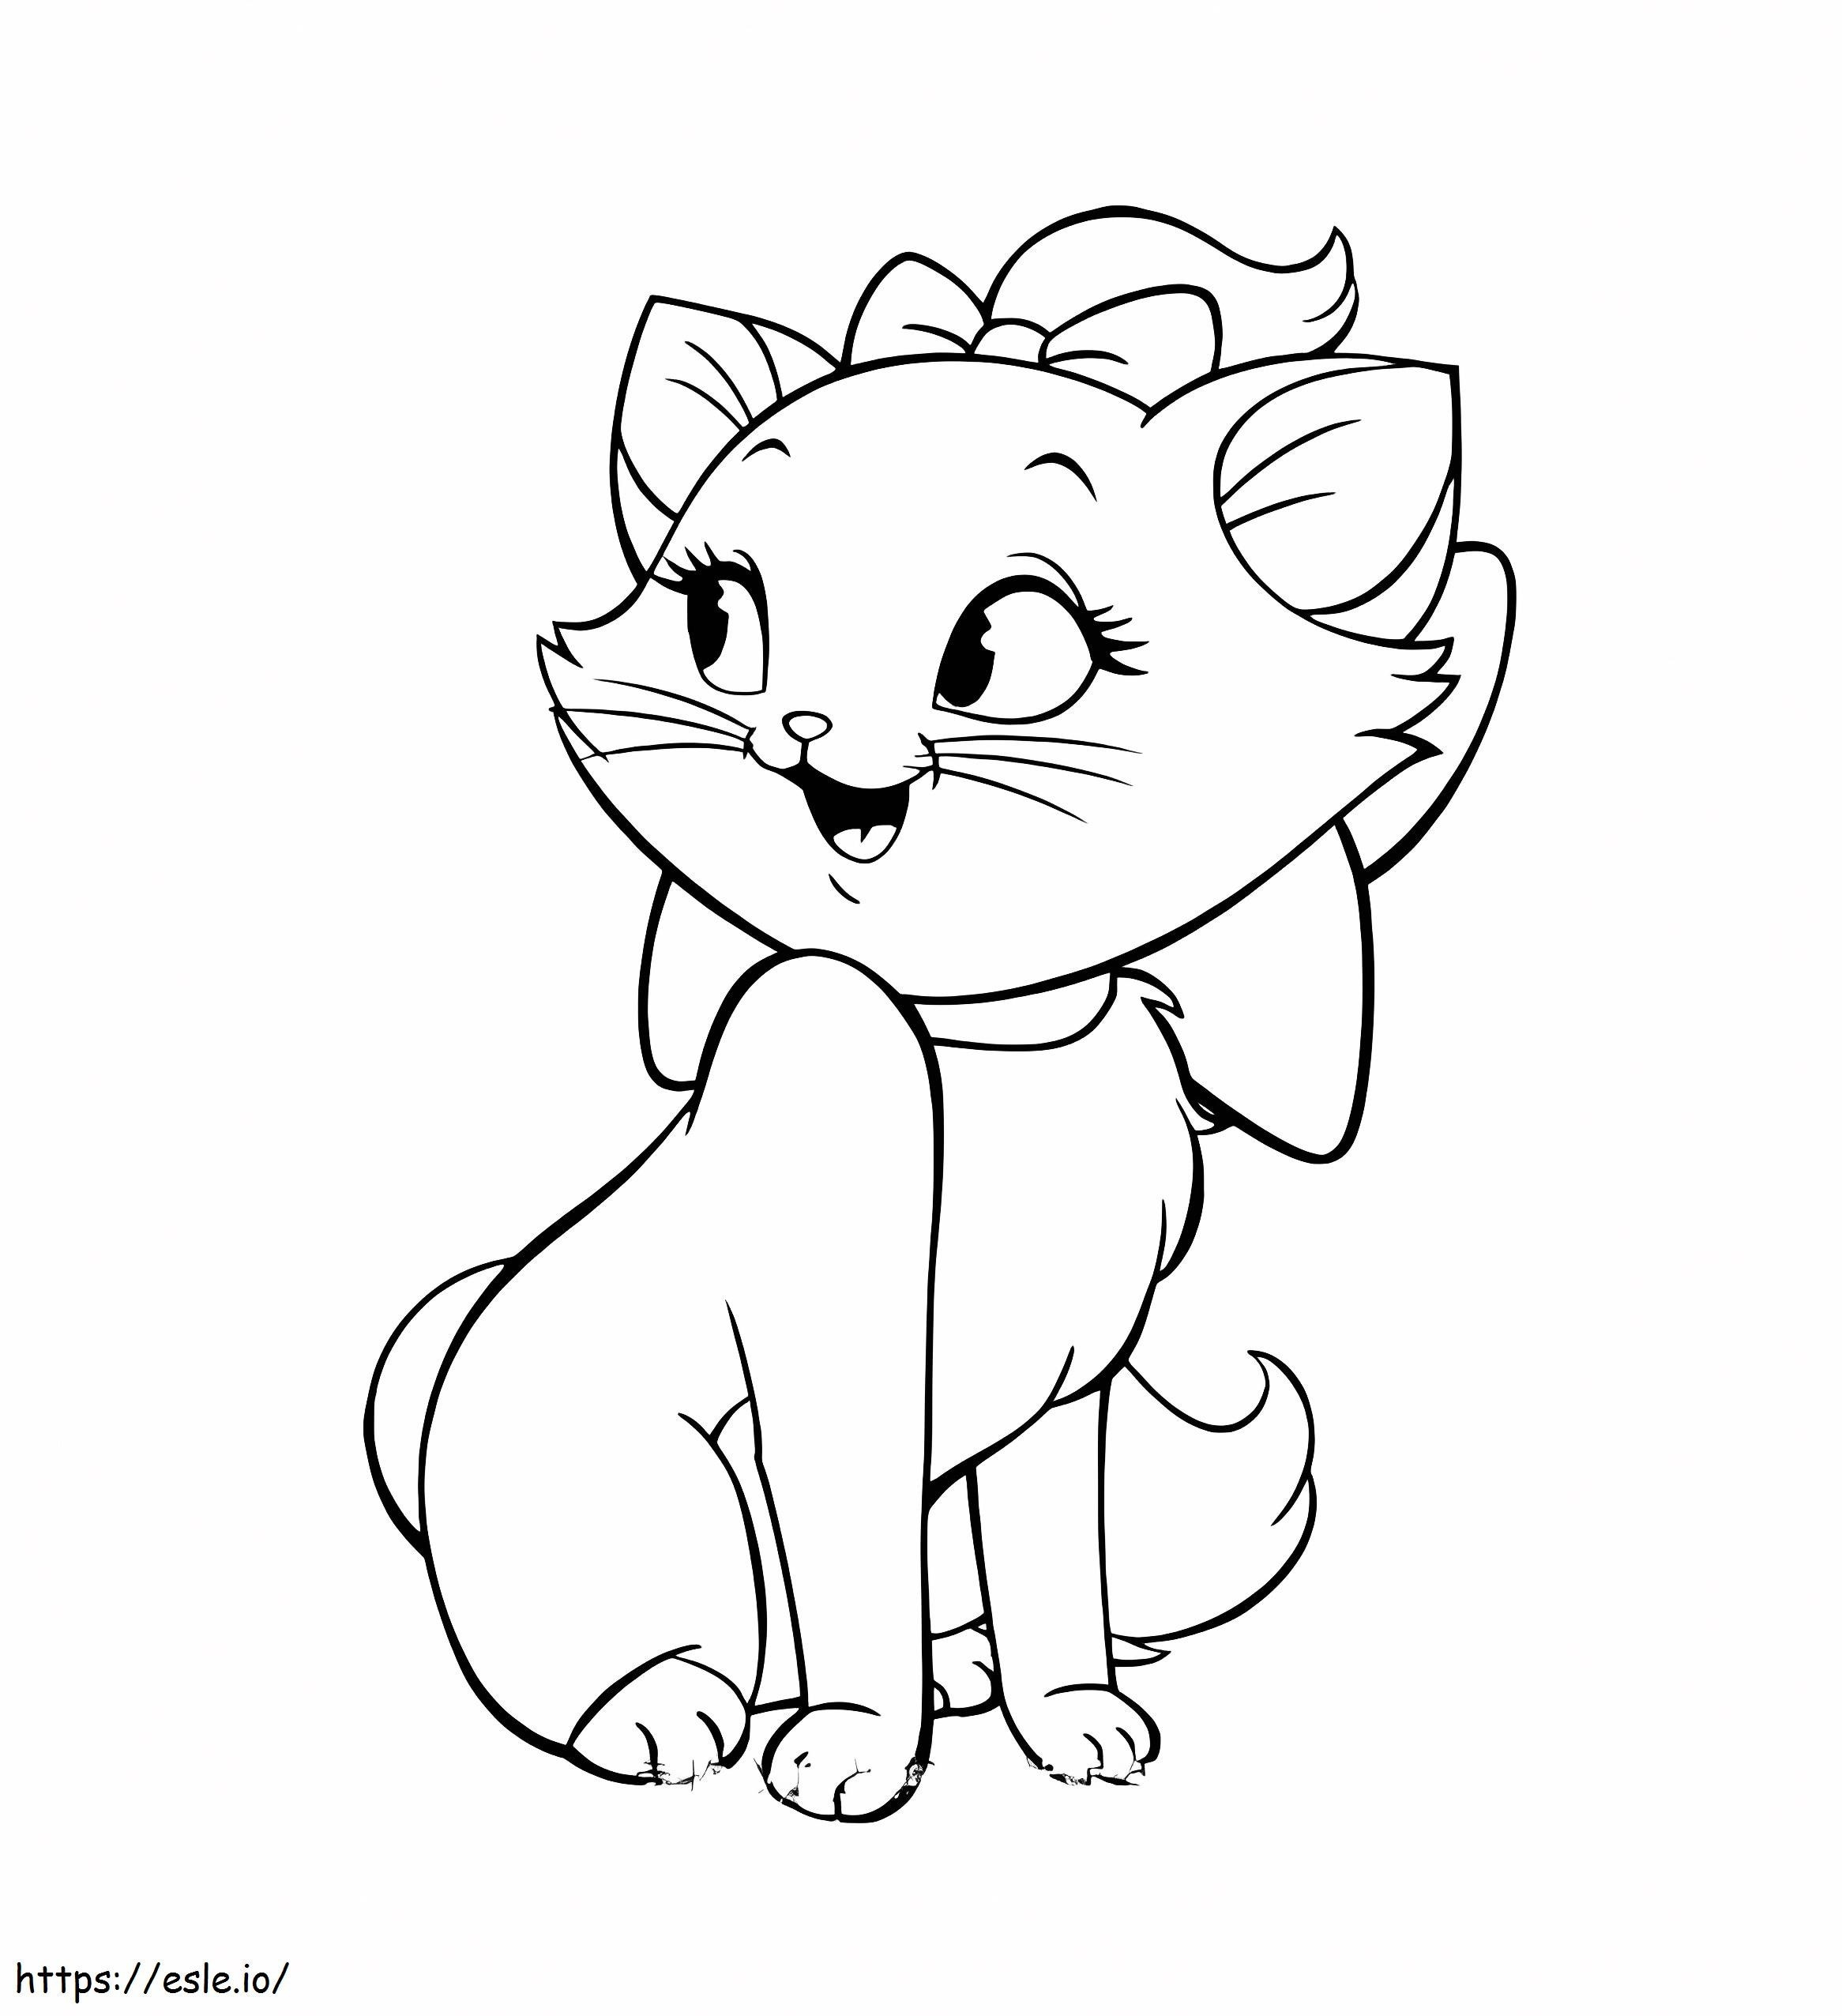 Marie Cat Coloring Page Free Coloring Pages coloring page